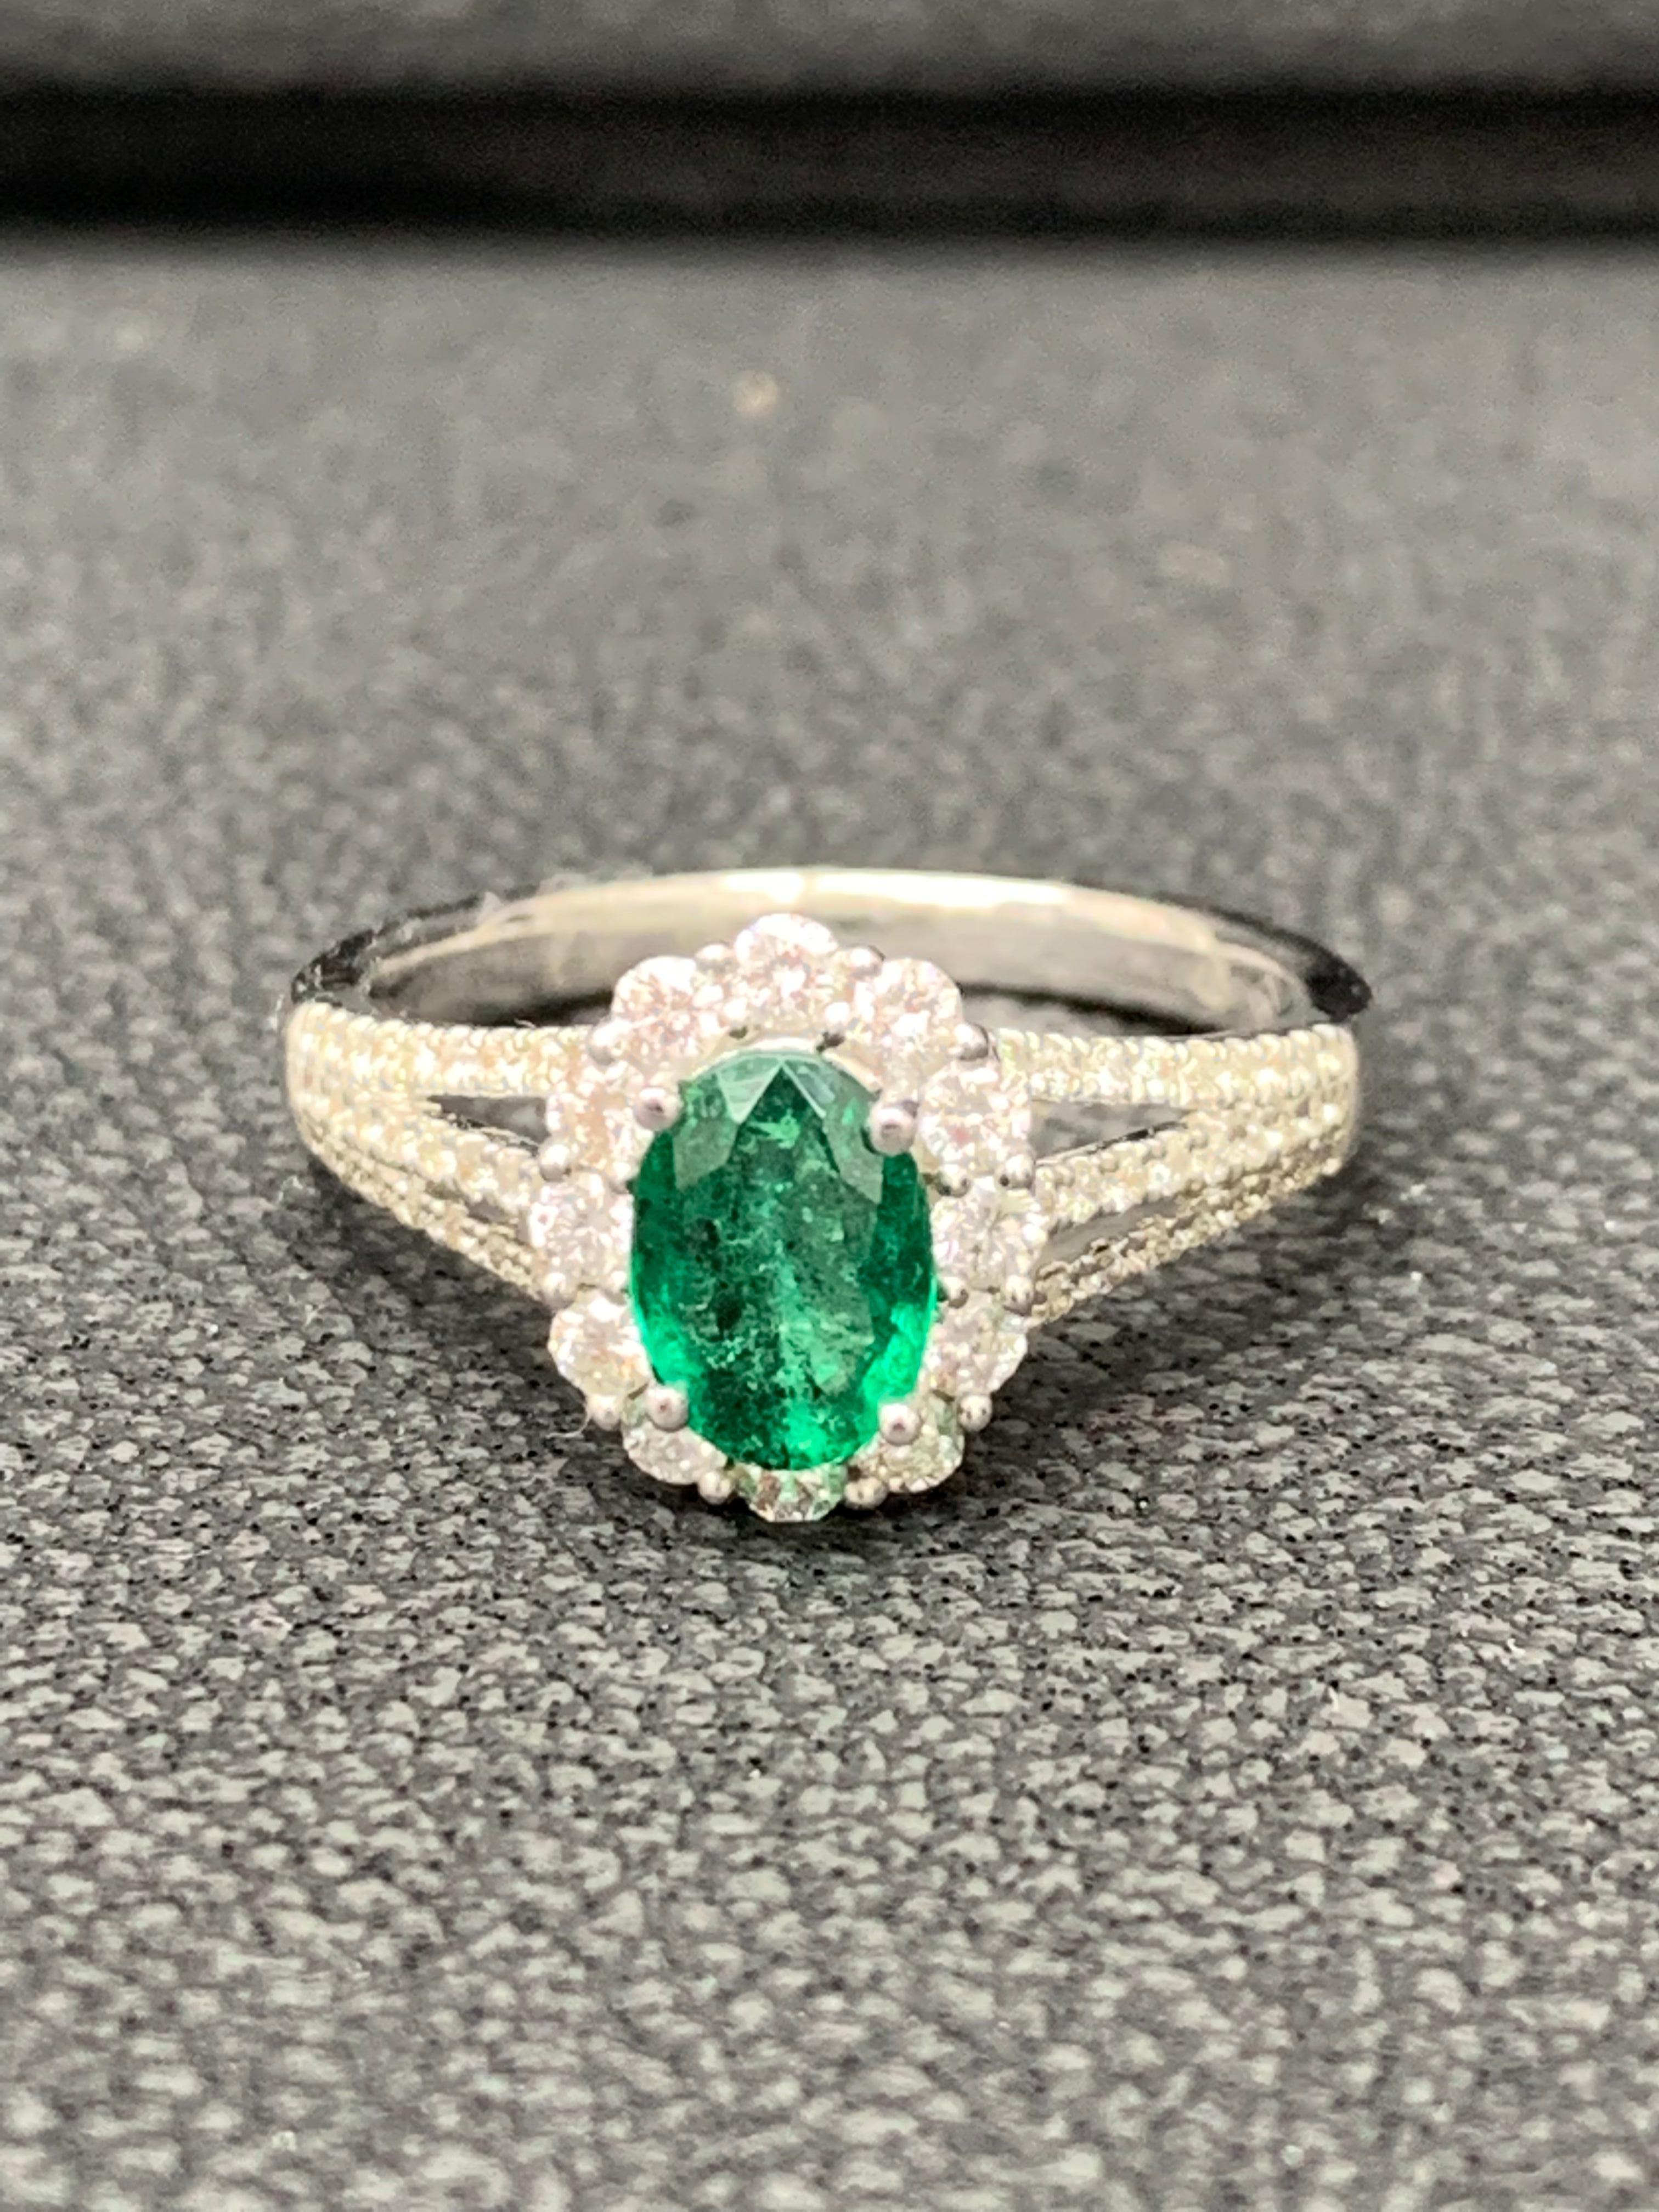 A beautiful and fashionable ring showcasing 0.73 Carat Oval cut Emerald surrounded by round brilliant diamonds, weighing 0.52 carat in total . Mounted in a 18k white gold split-shank setting  Size 6.5 US 